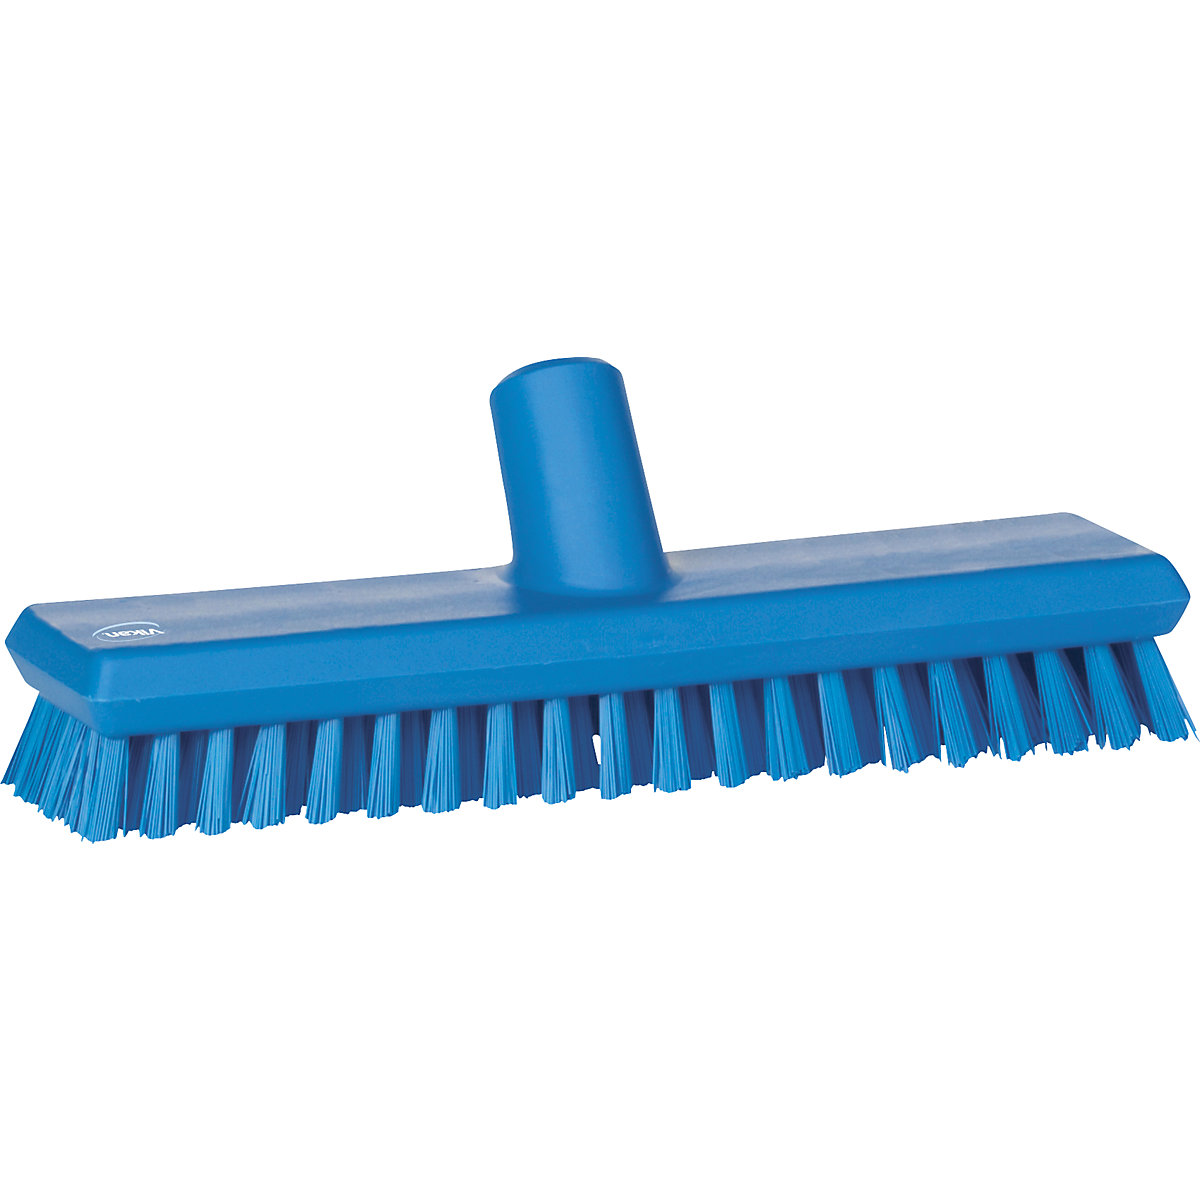 Vikan – Scrubber with water channel, extra hard, pack of 10, blue